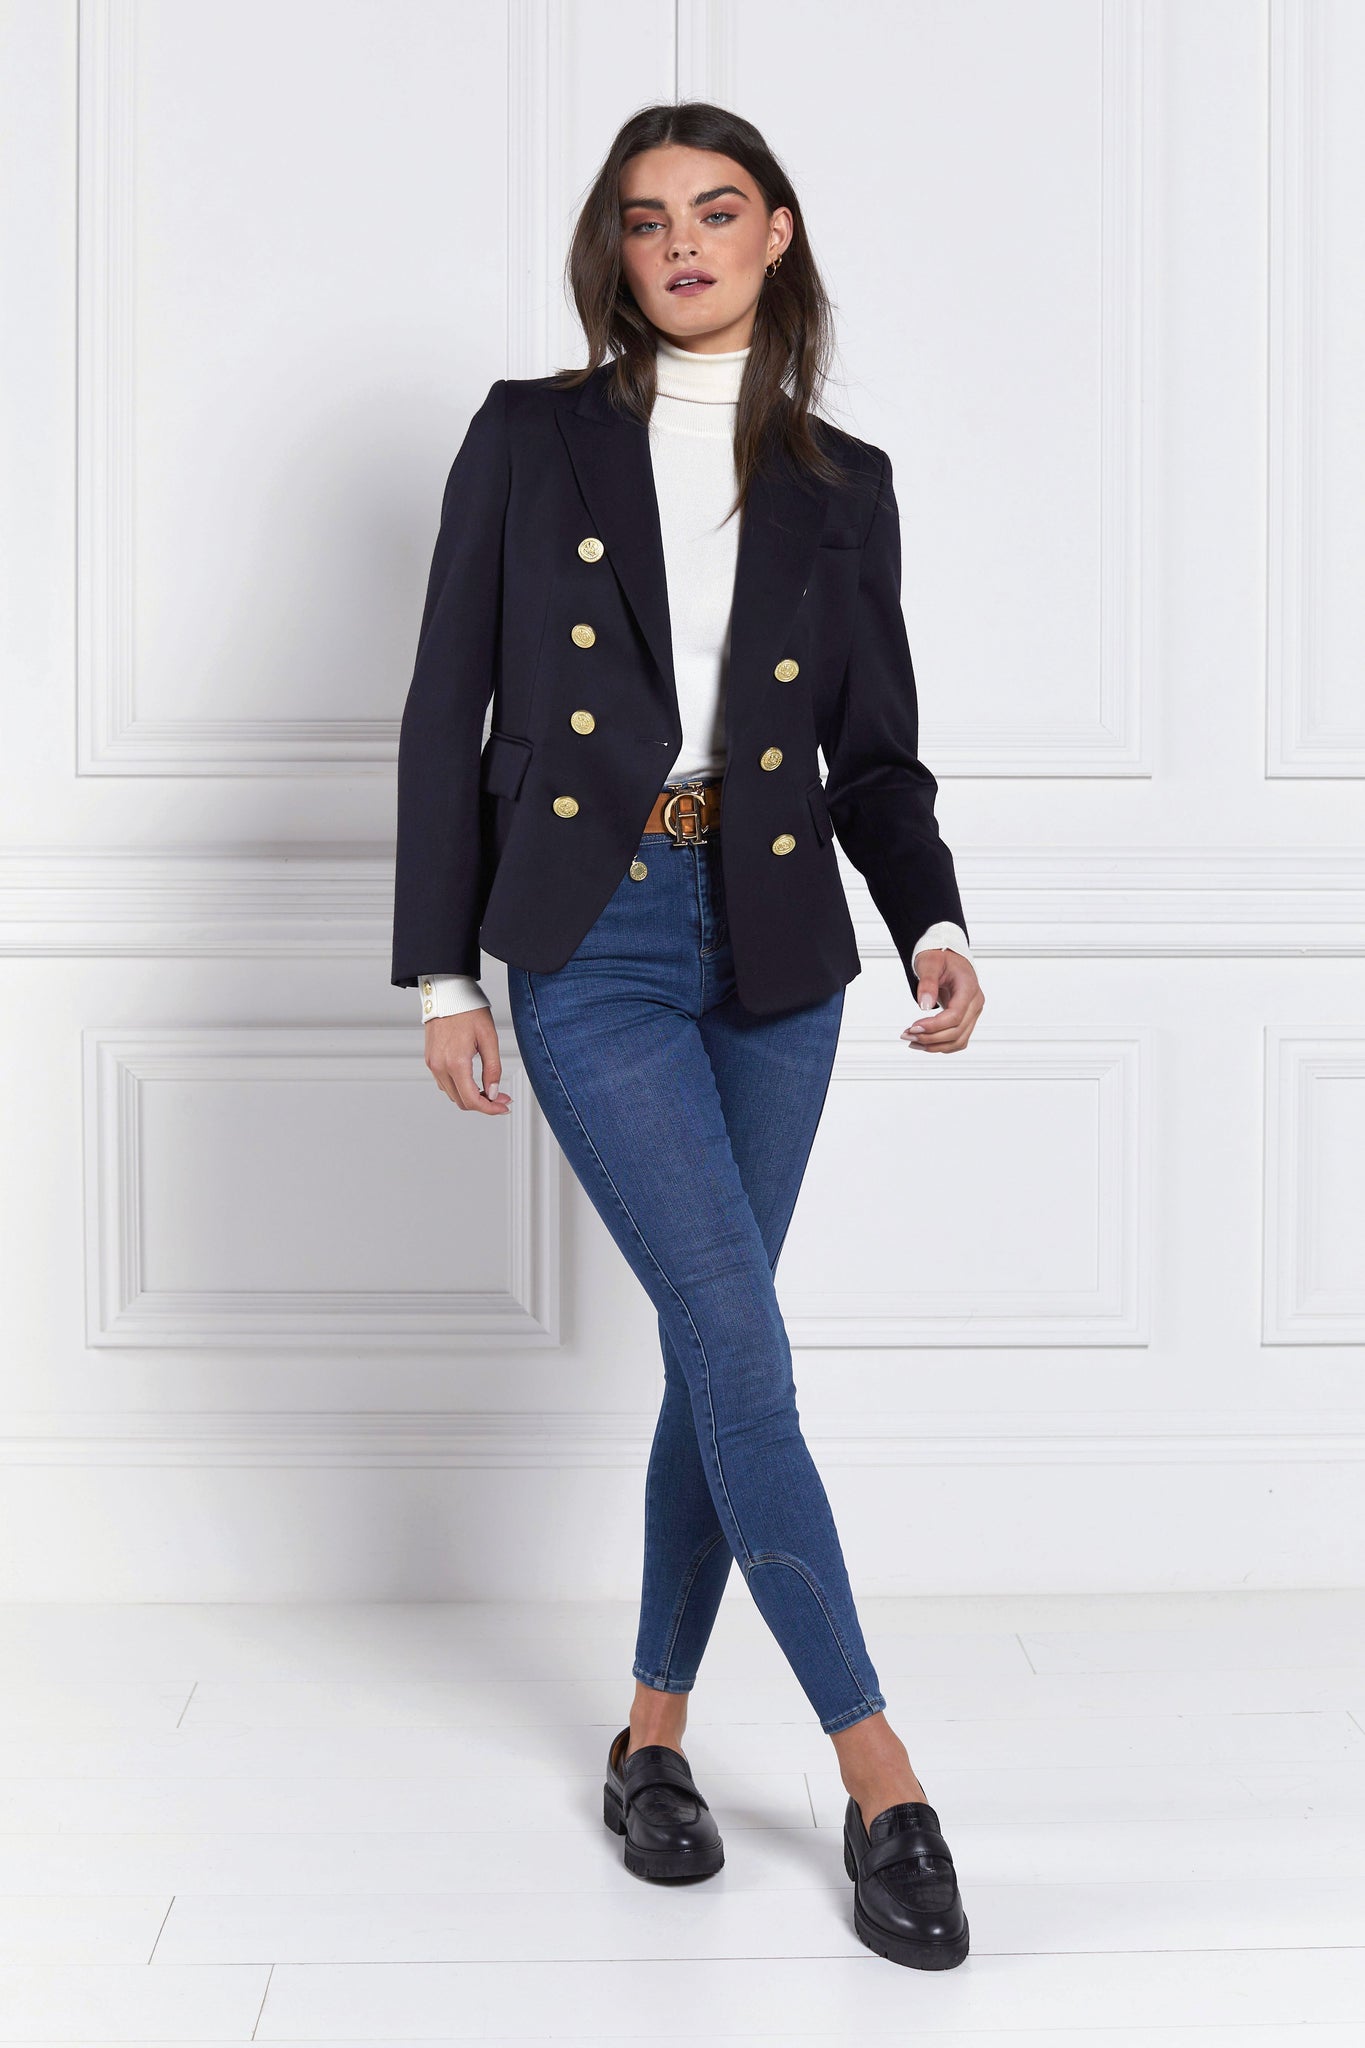 British made double breasted blazer that fastens with a single button hole to create a more form fitting silhouette with two pockets and gold button detailing this blazer is made from navy barathea fabric worn with white roll neck tan belt and classic indigo denim skinny jeans